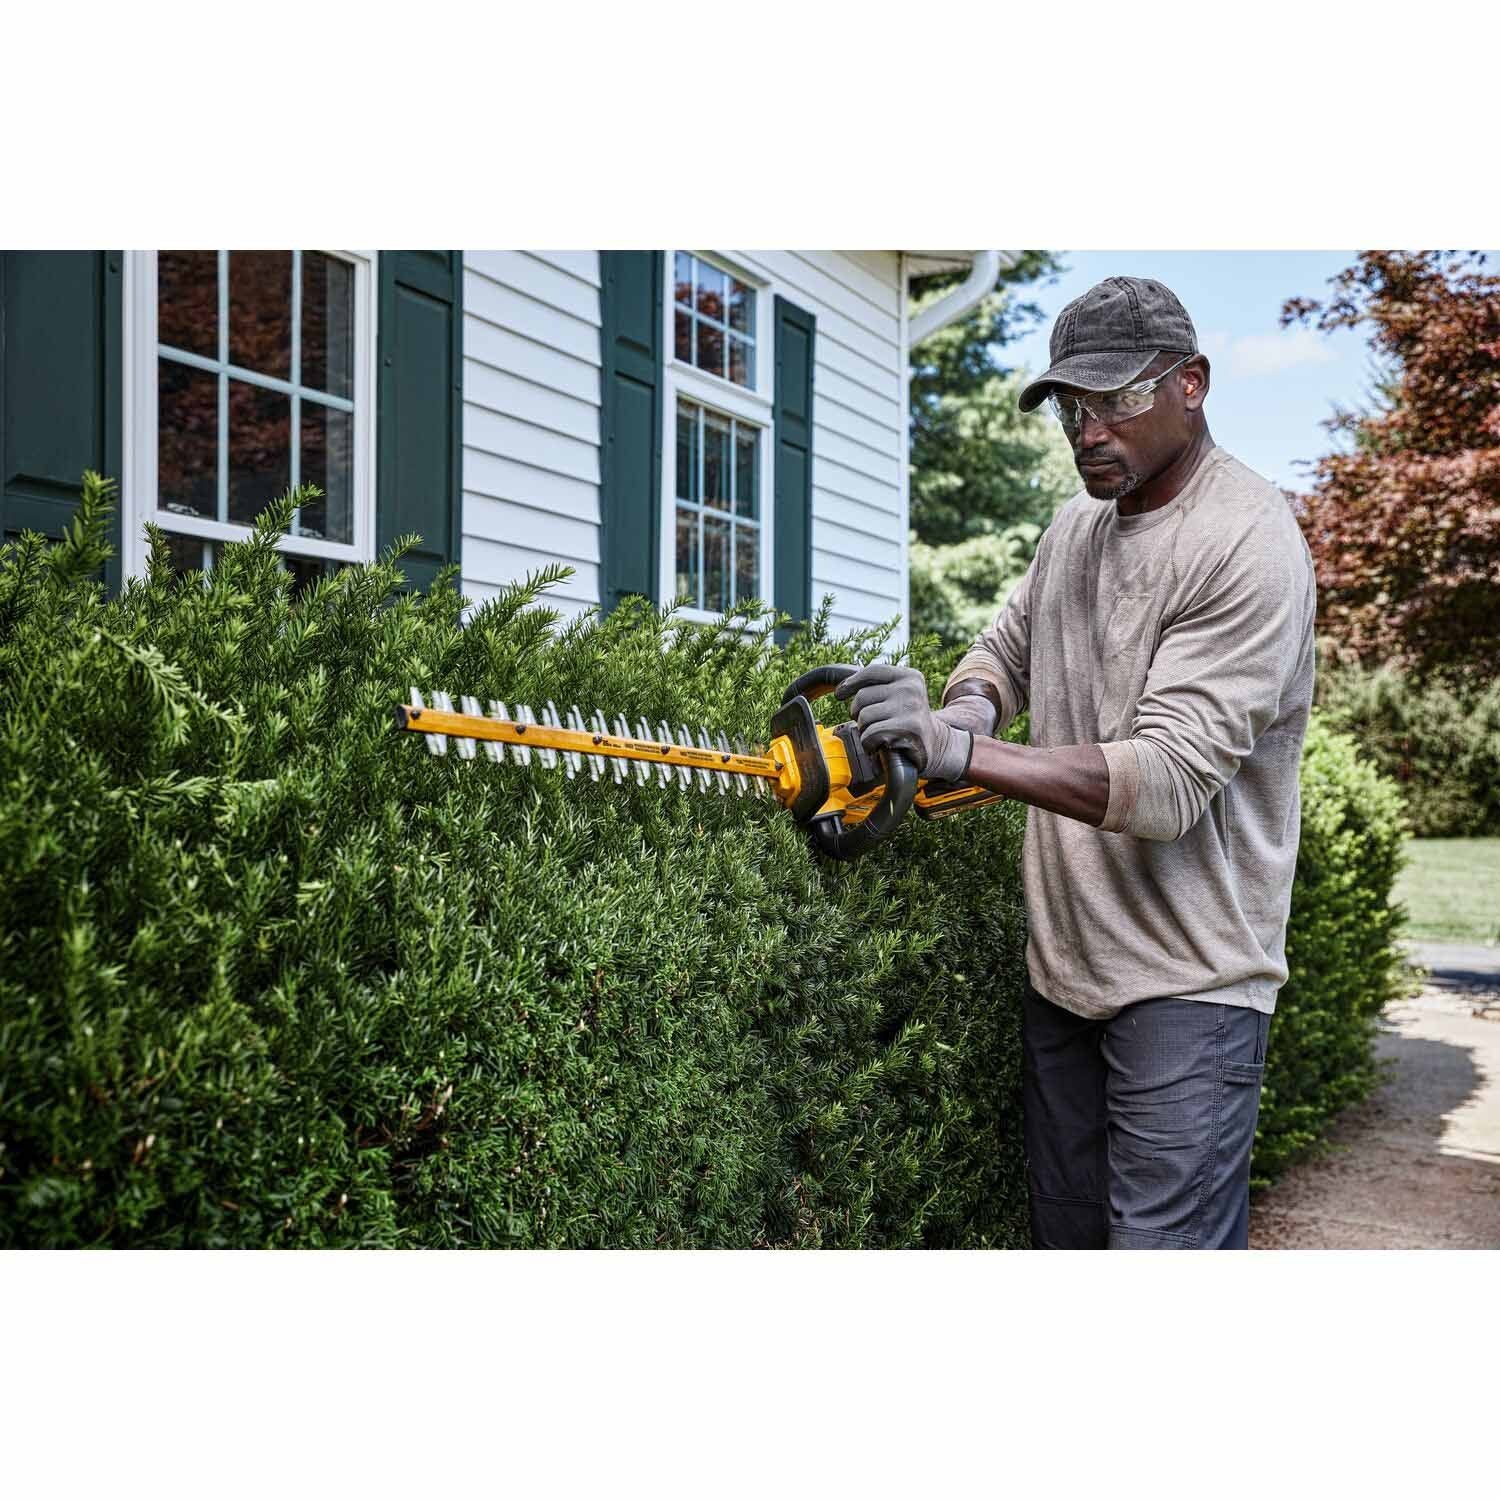 DeWalt DCHT870B 60V MAX* 26 in. Brushless Cordless Hedge Trimmer (Tool Only)